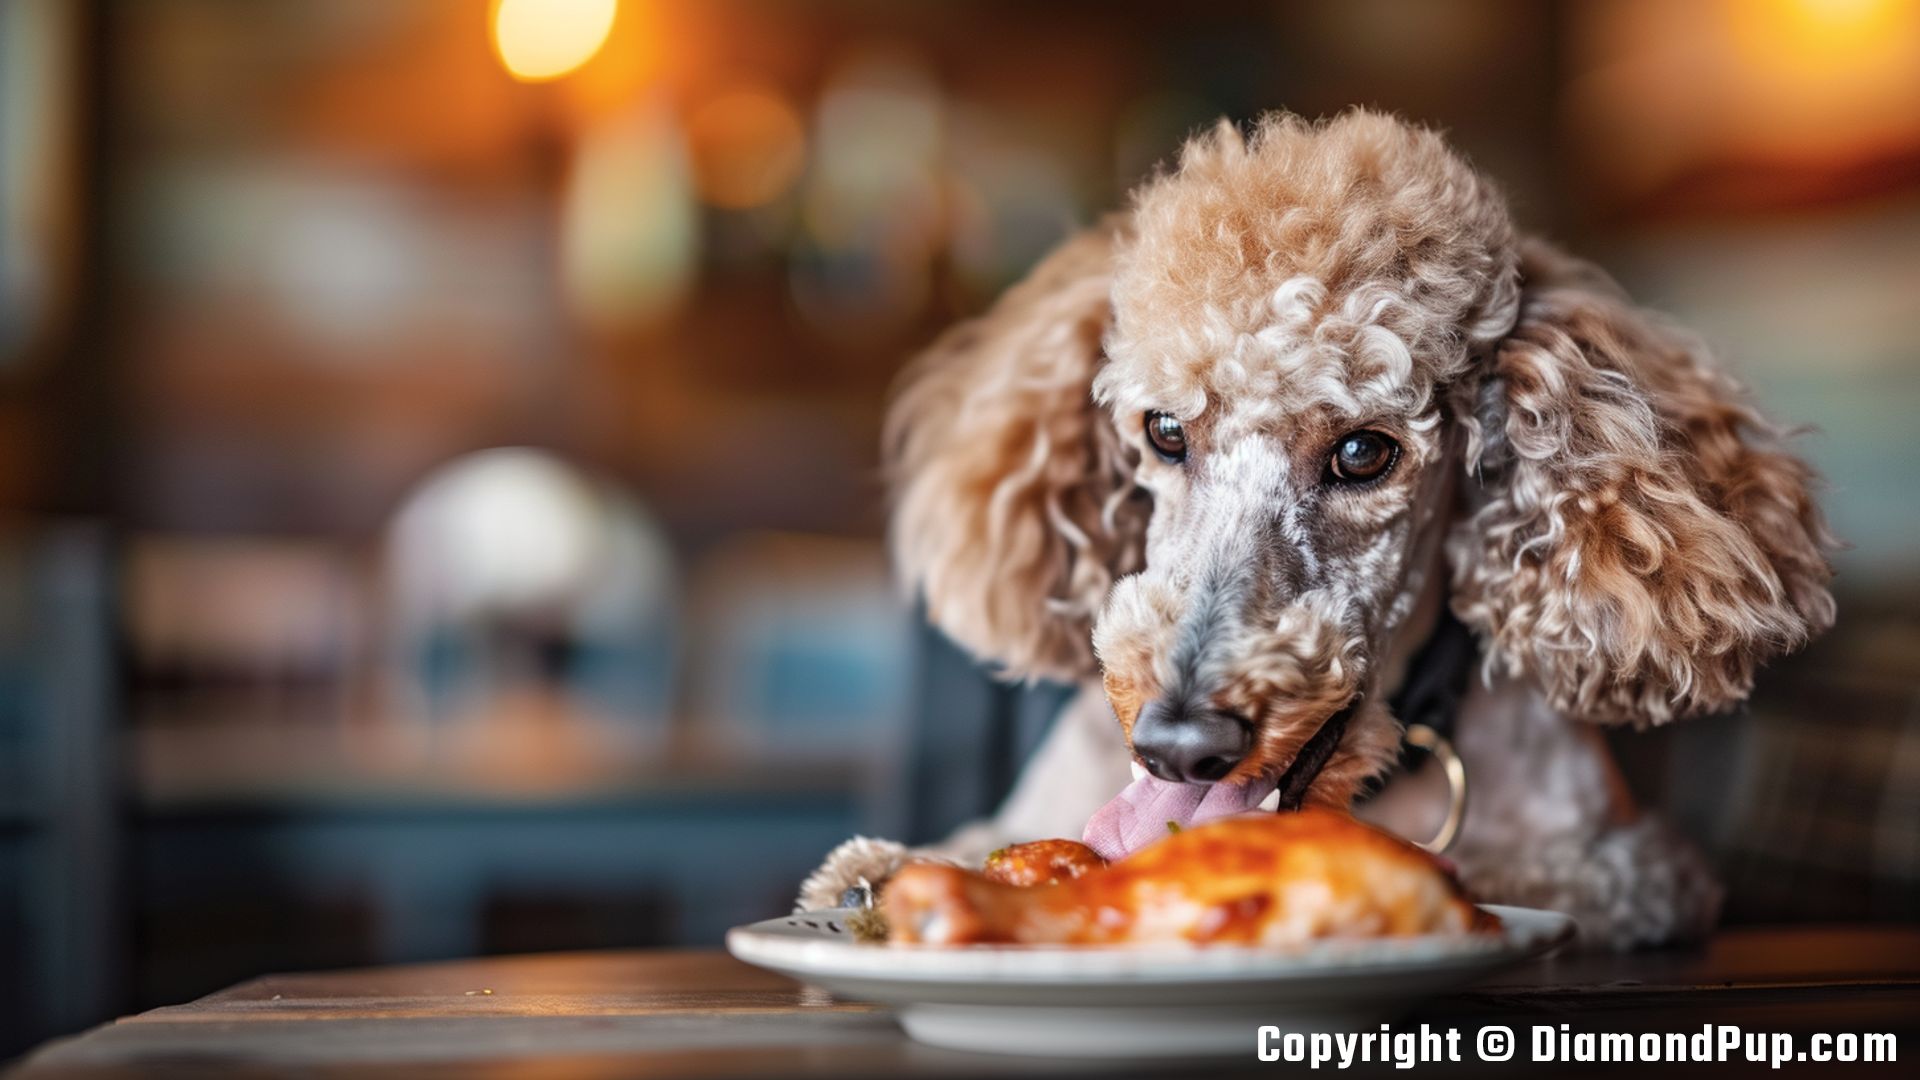 Photo of an Adorable Poodle Snacking on Chicken